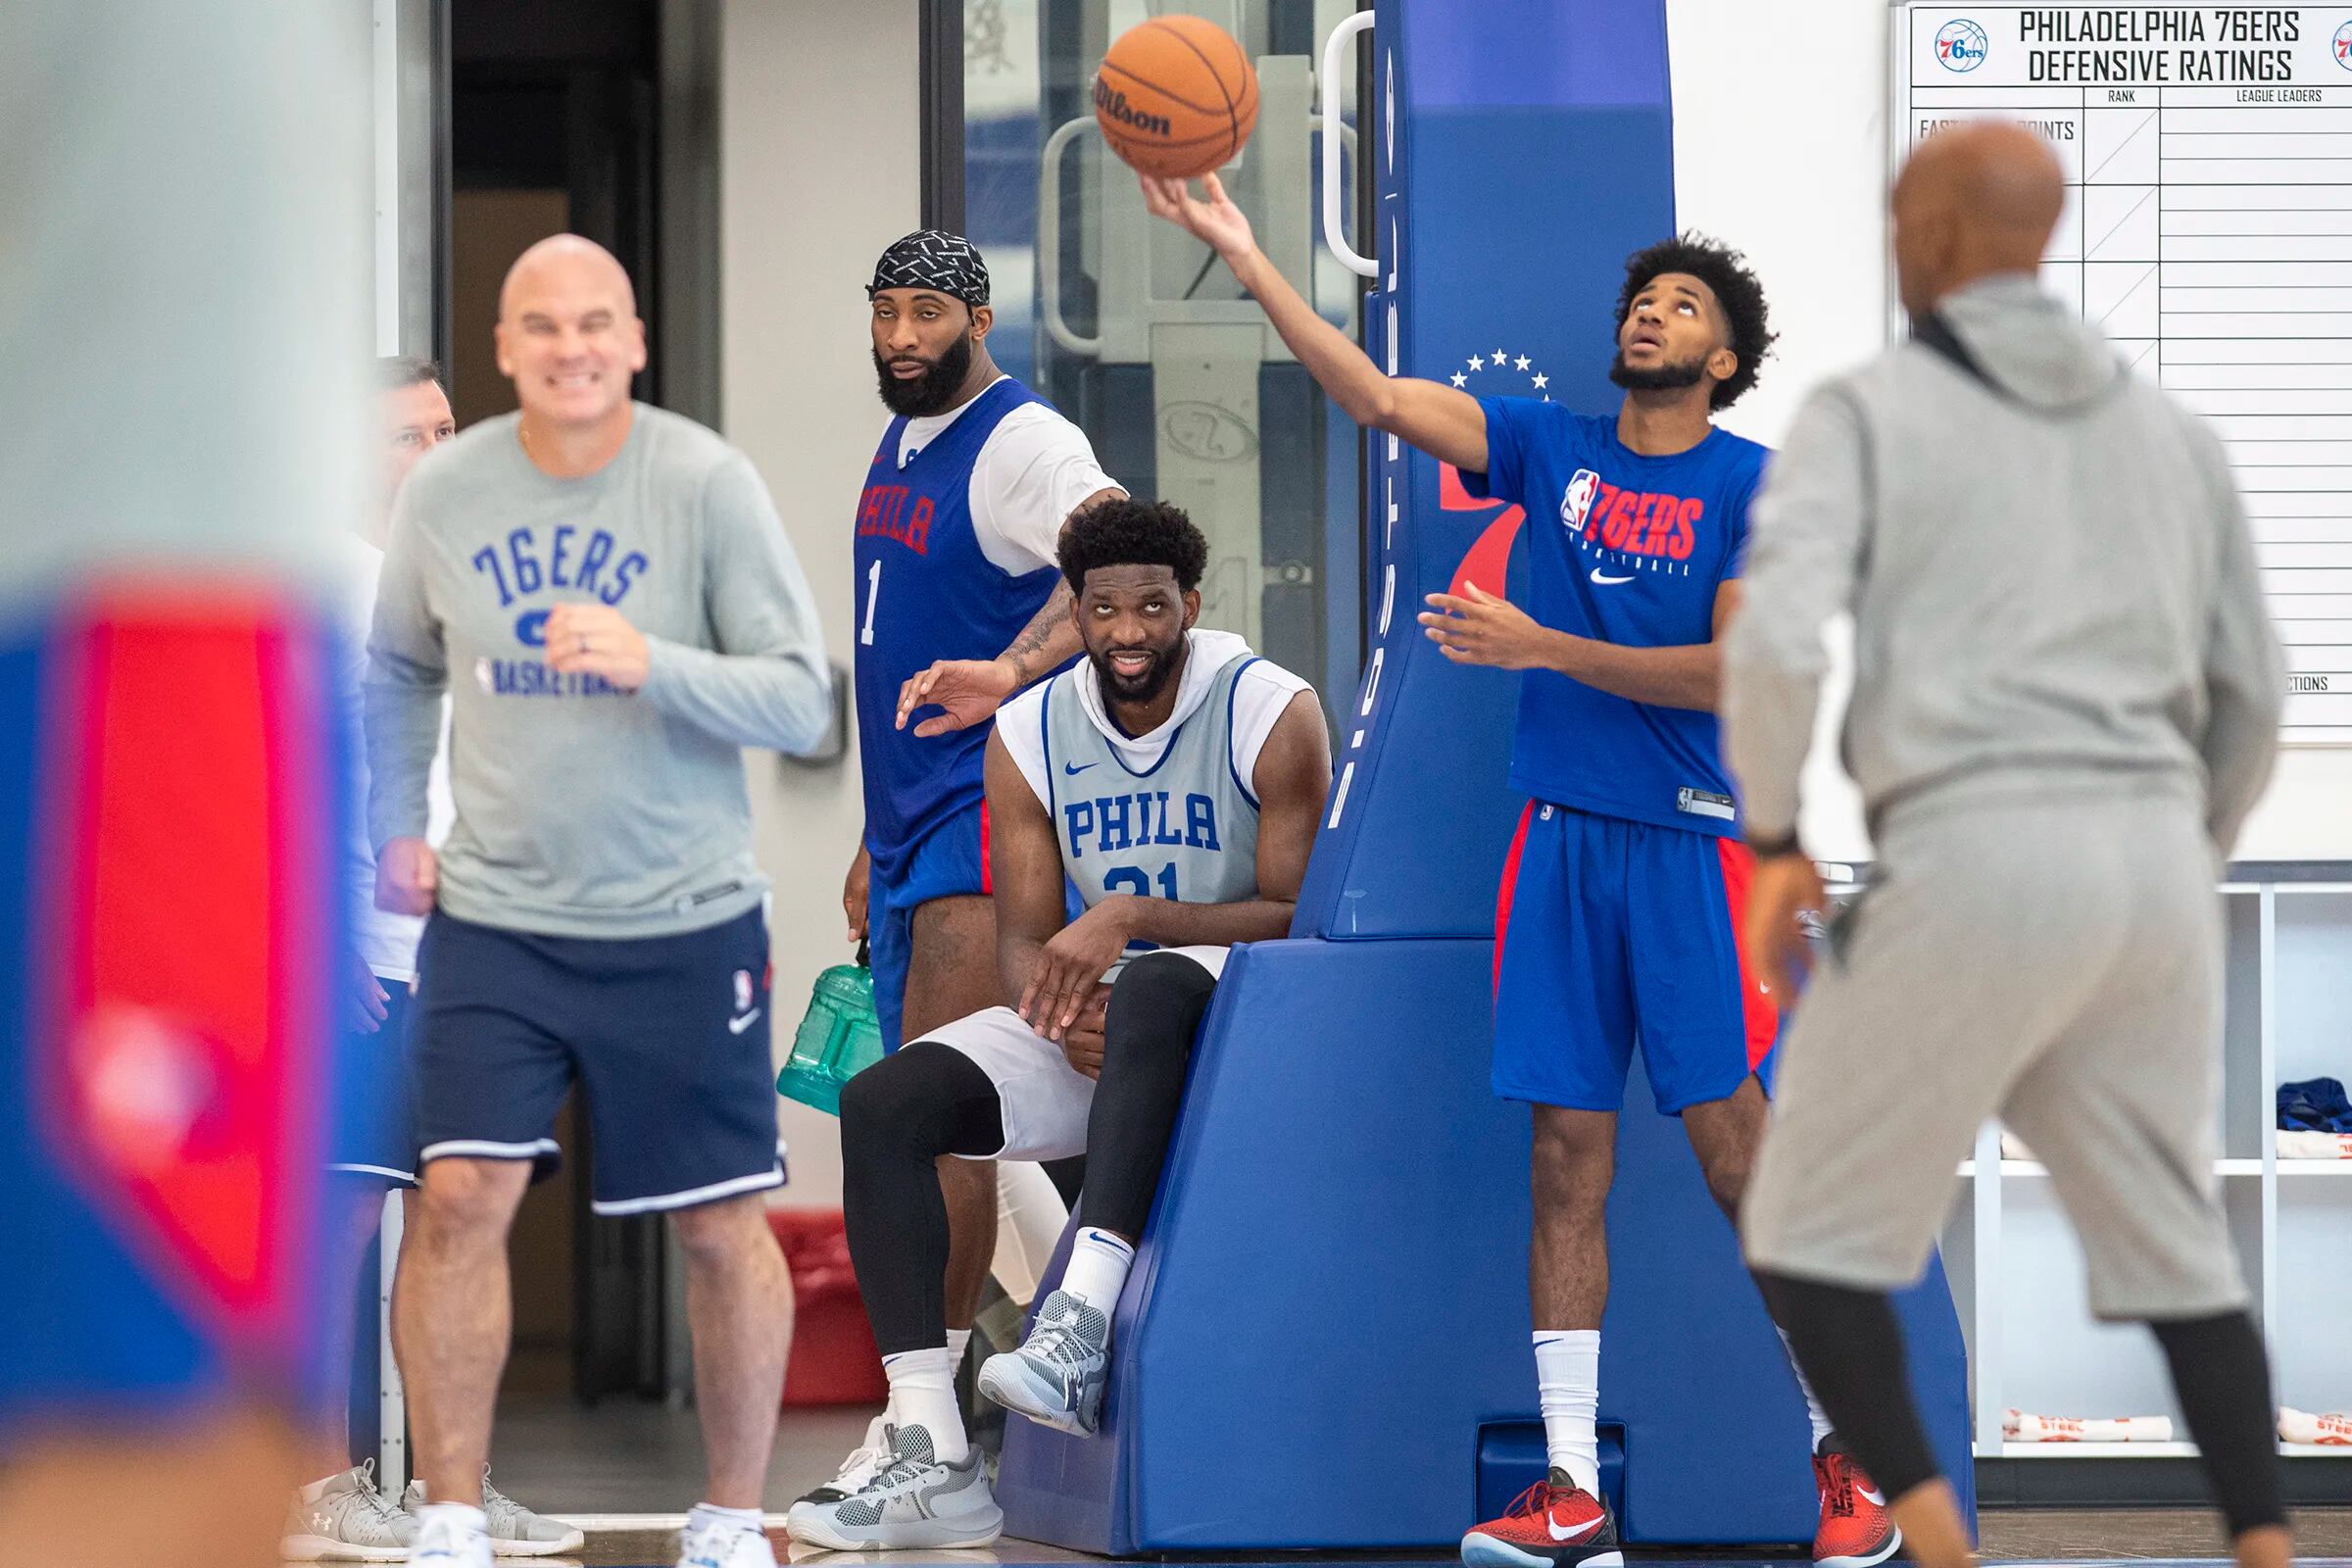 Philadelphia 76ers to hold training camp at Colorado State